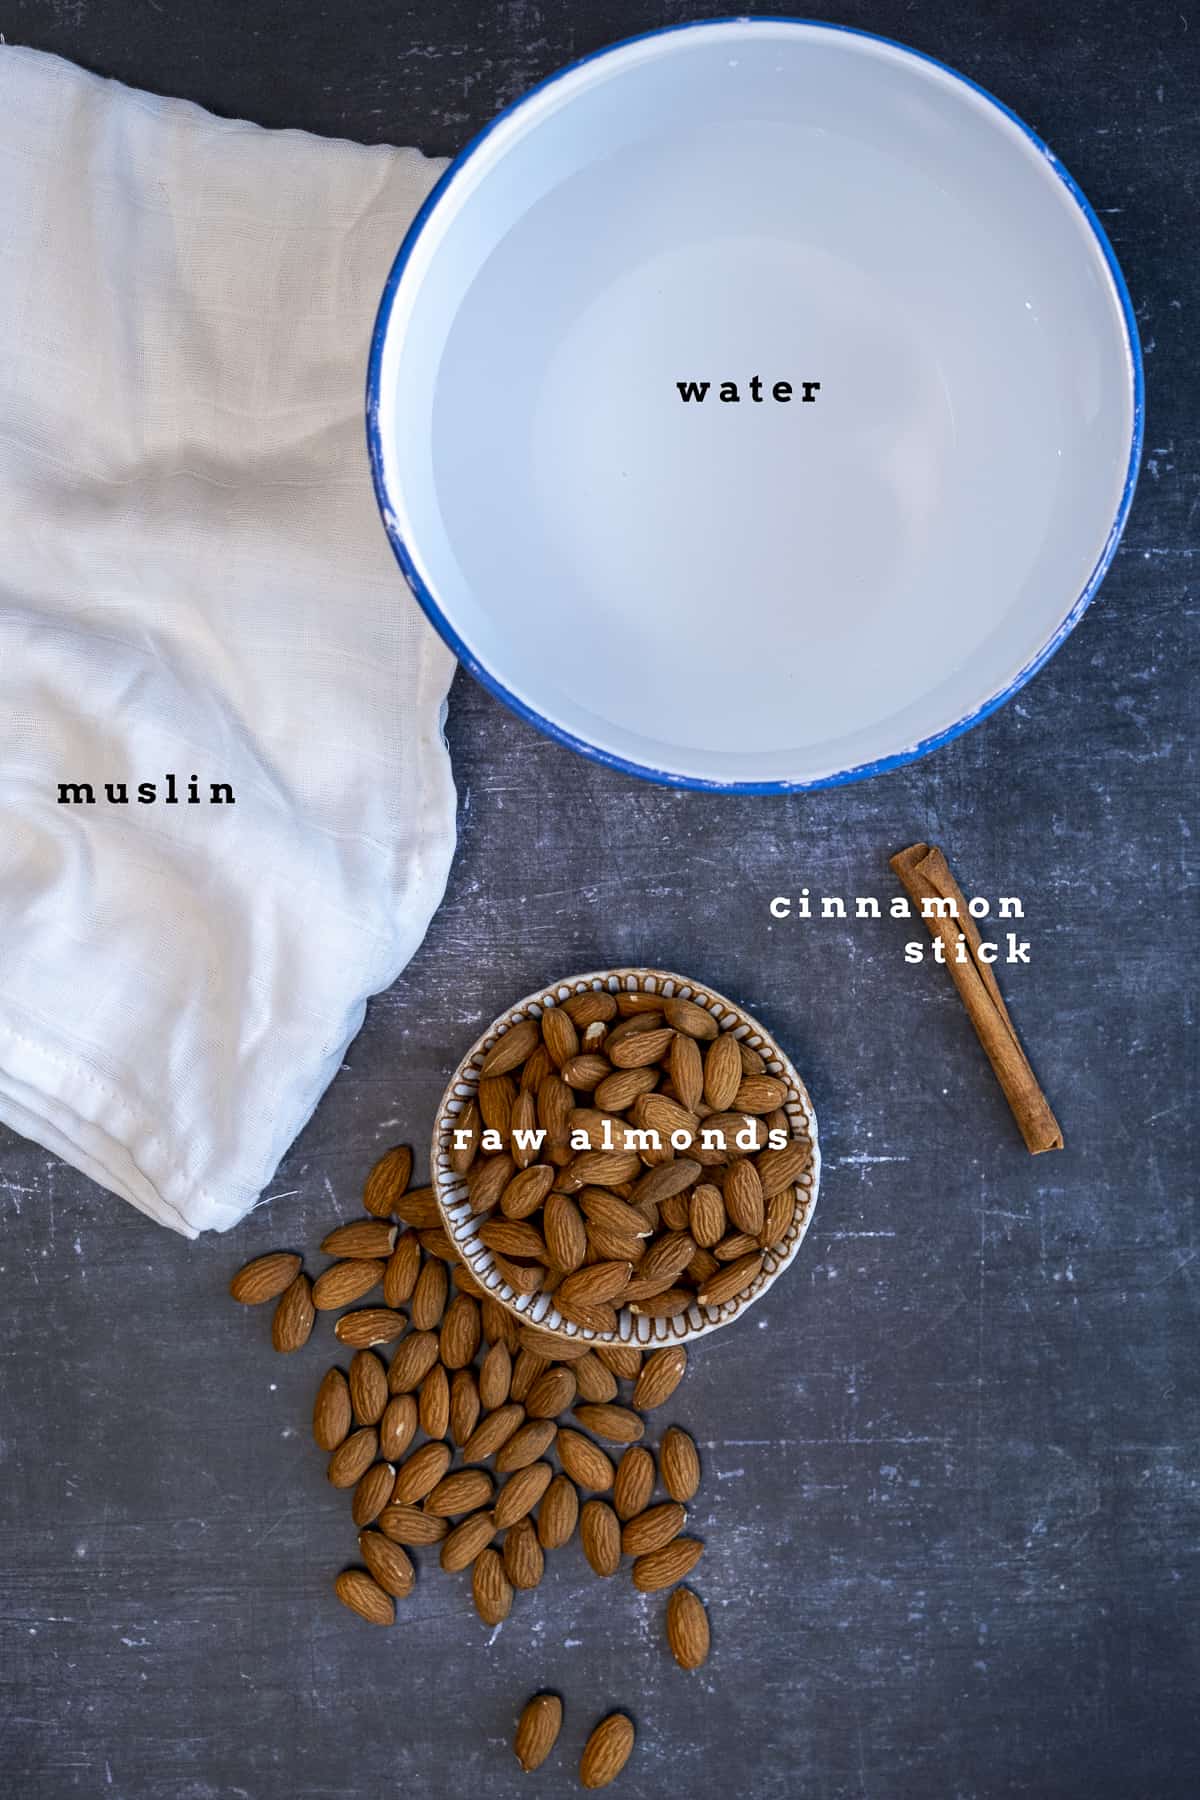 Water in a large white bowl, whole raw almonds in a bowl and on the ground, a cinnamon stick and a white muslin on a dark background.